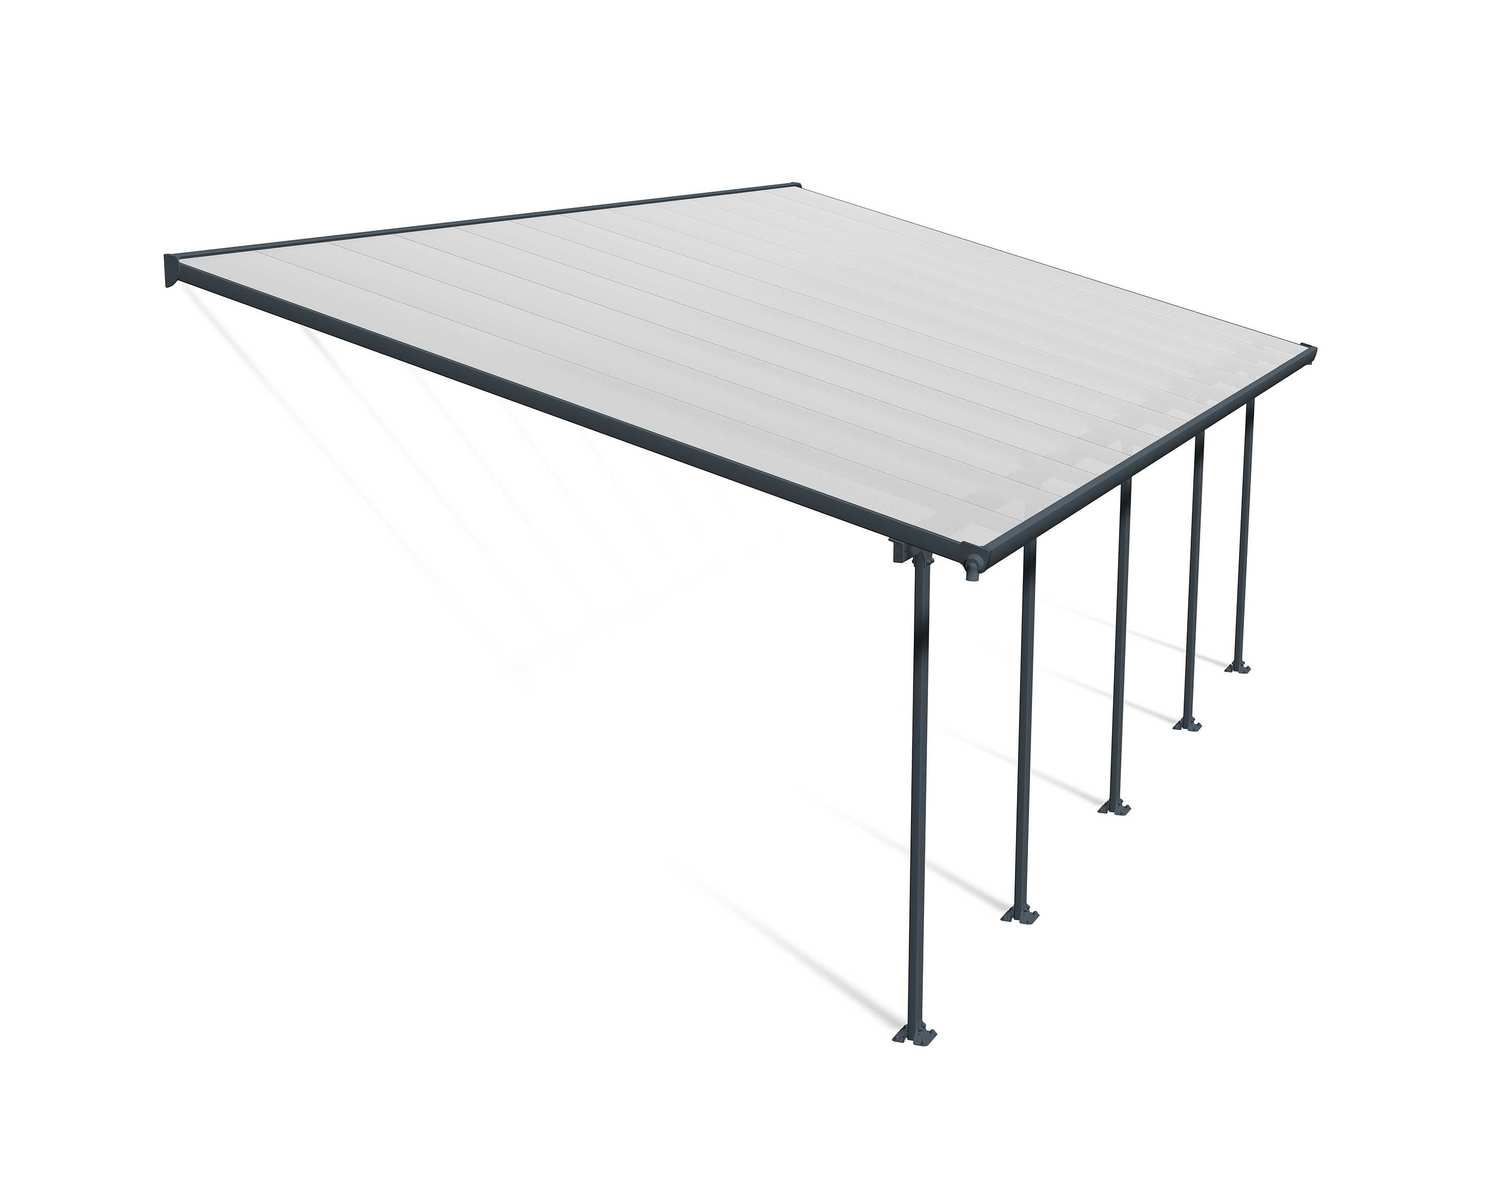 Feria 13 ft. x 26 ft. Grey Aluminium Patio Cover With 5 Posts, Clear Twin-Wall Polycarbonate Roof Panels.